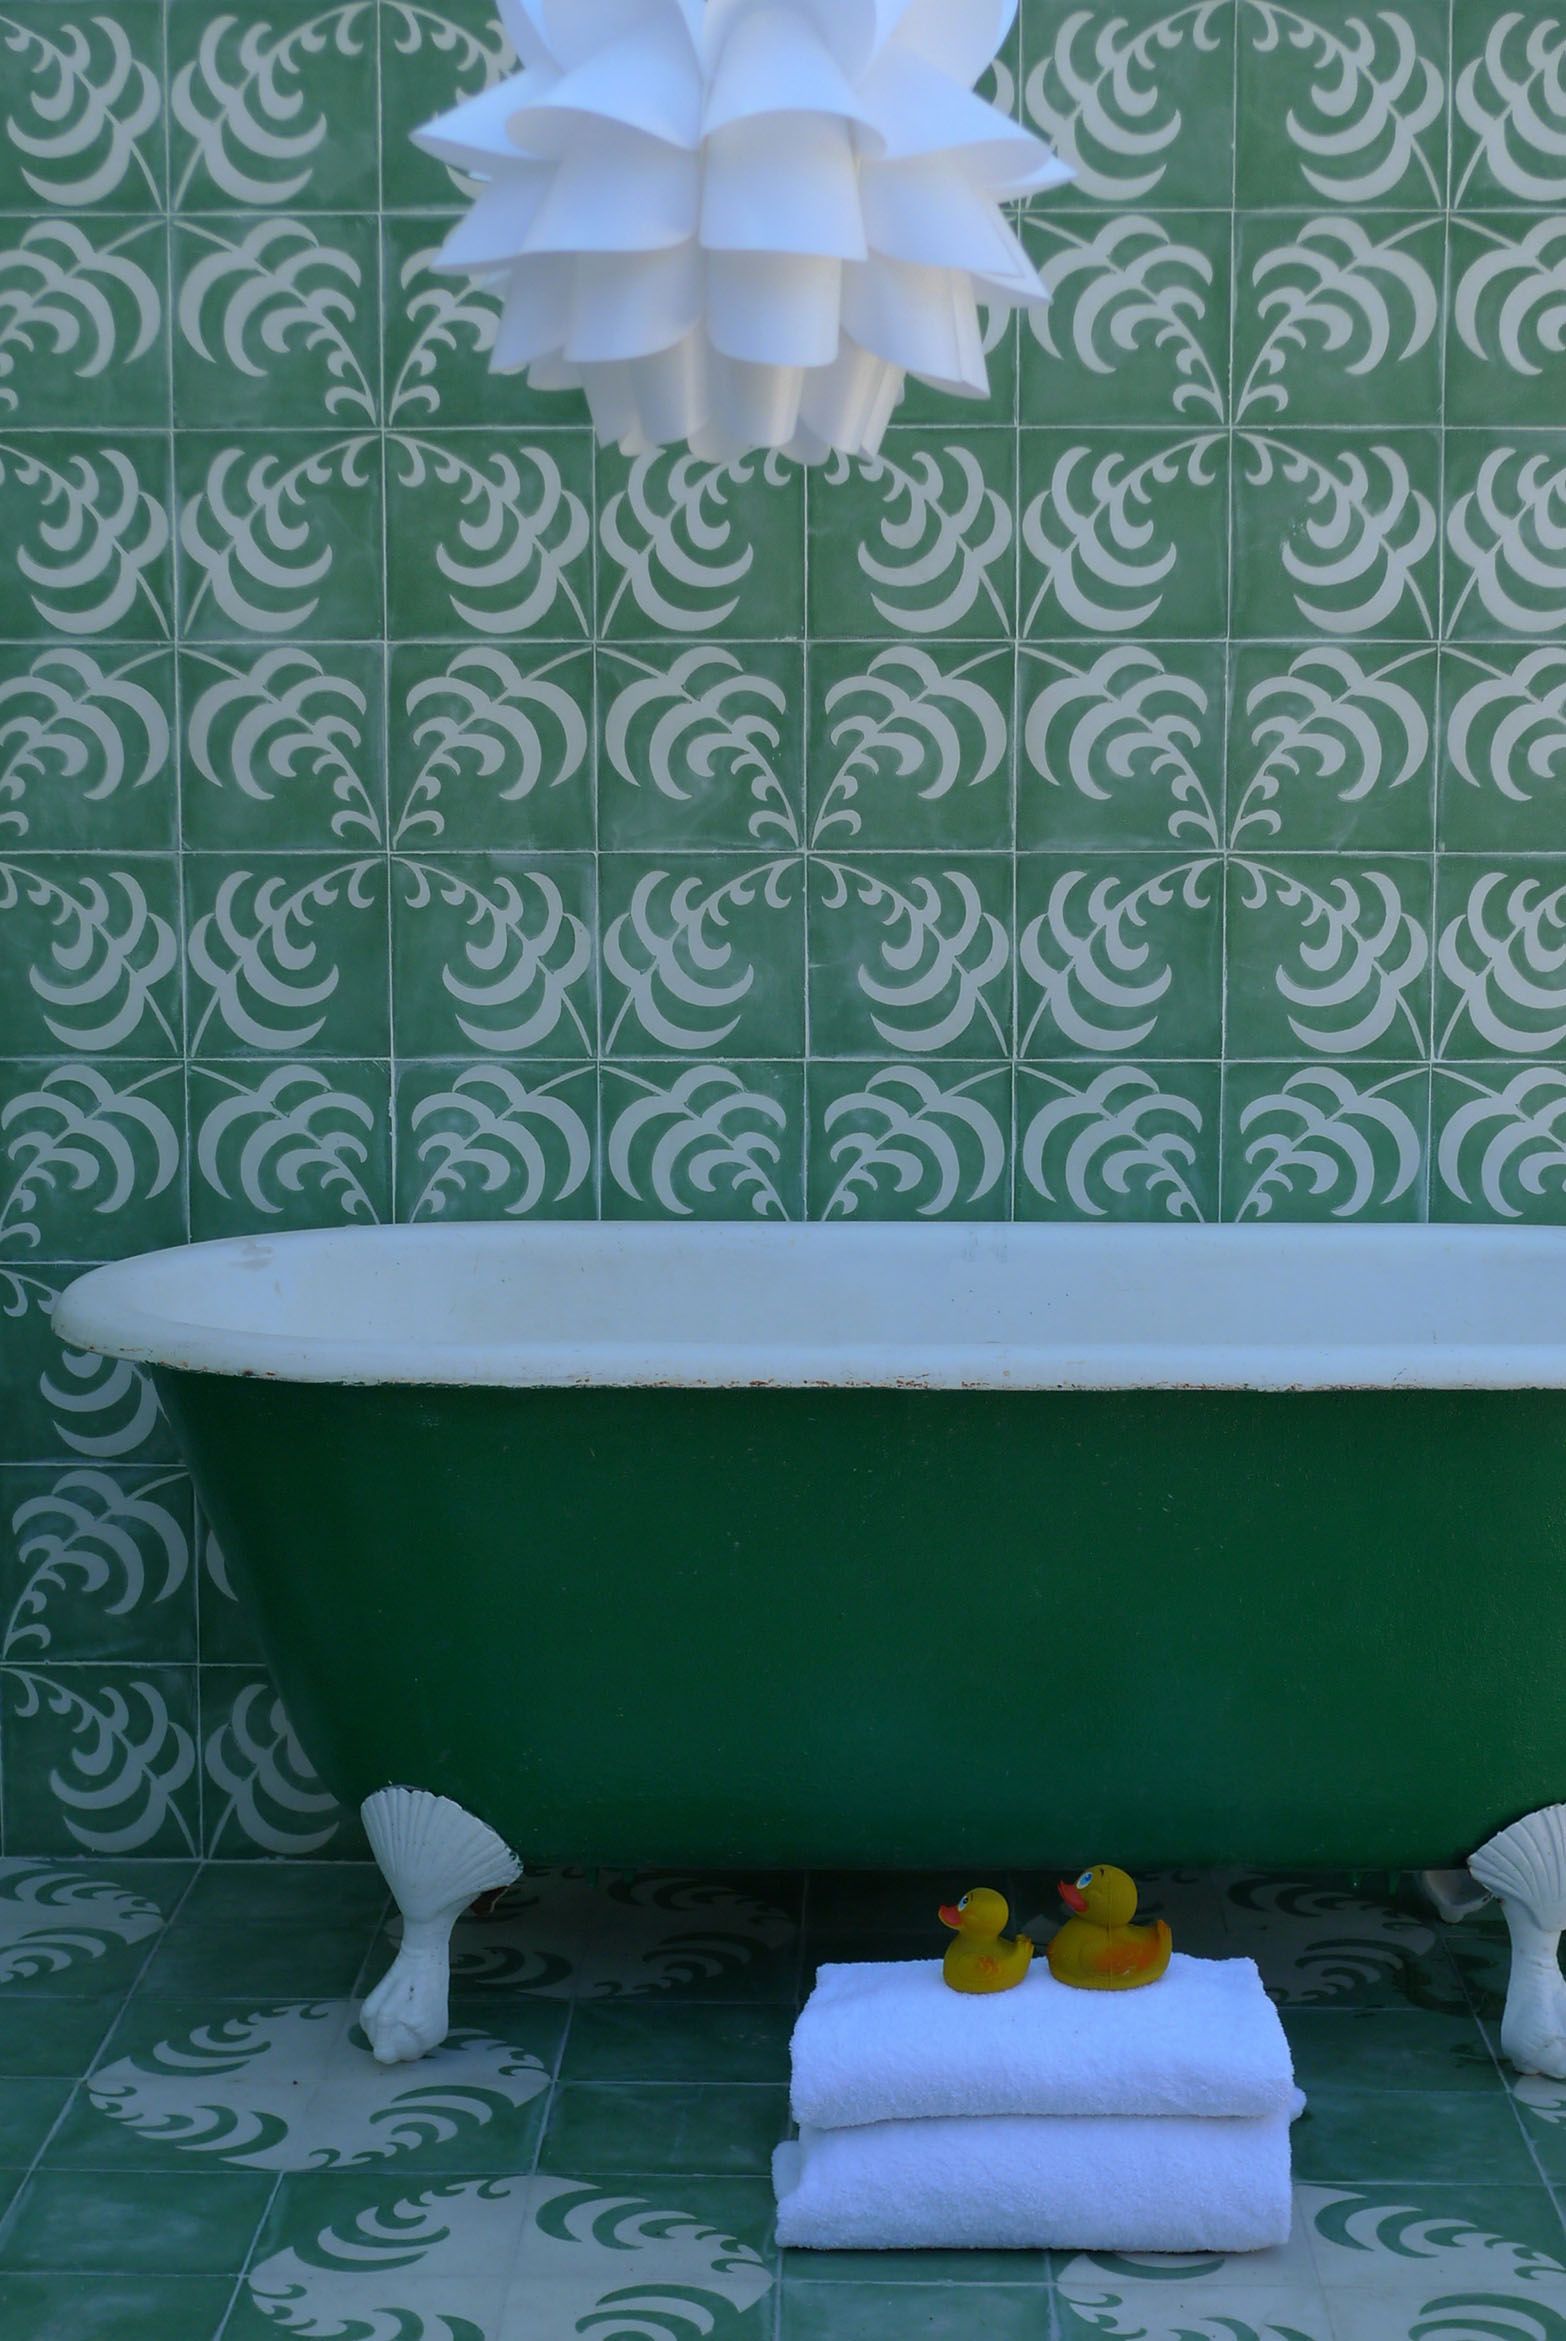 Use Concrete Tile in the Bathroom